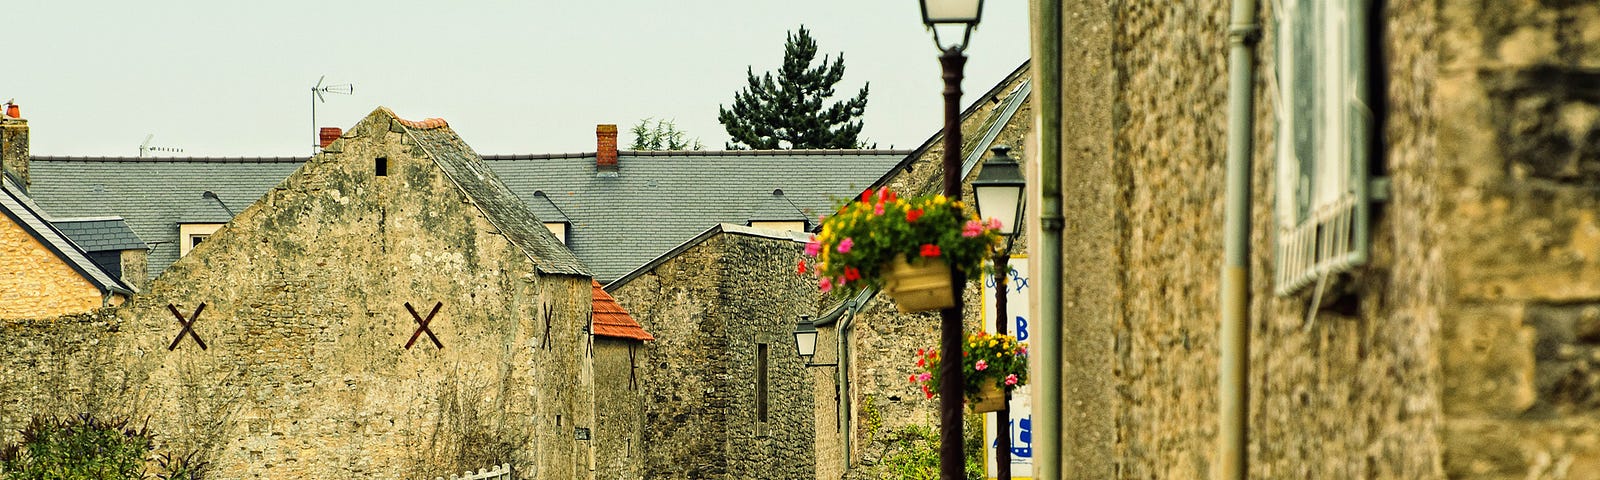 Grey stone buildings on French village street.